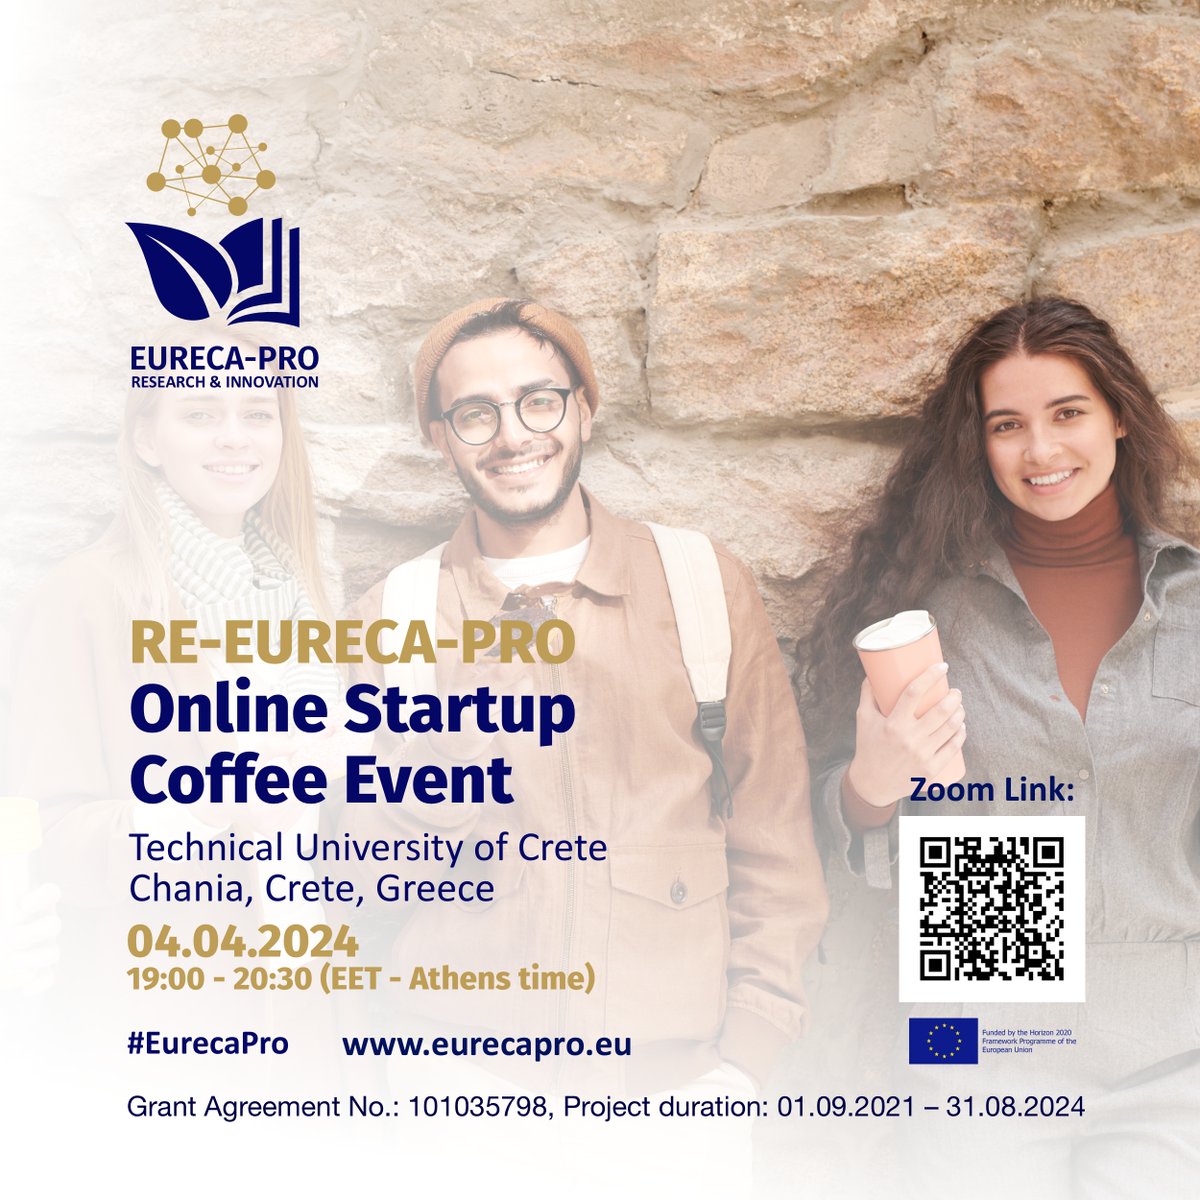 ☕ The RE-EURECA-PRO “Startup Coffee Event” is the perfect opportunity to connect with peers around Europe, talk about startups, expand your network and have fun! 👉 More information here: rb.gy/klqz2r #eurecapro #SDG12 #startup #coffee